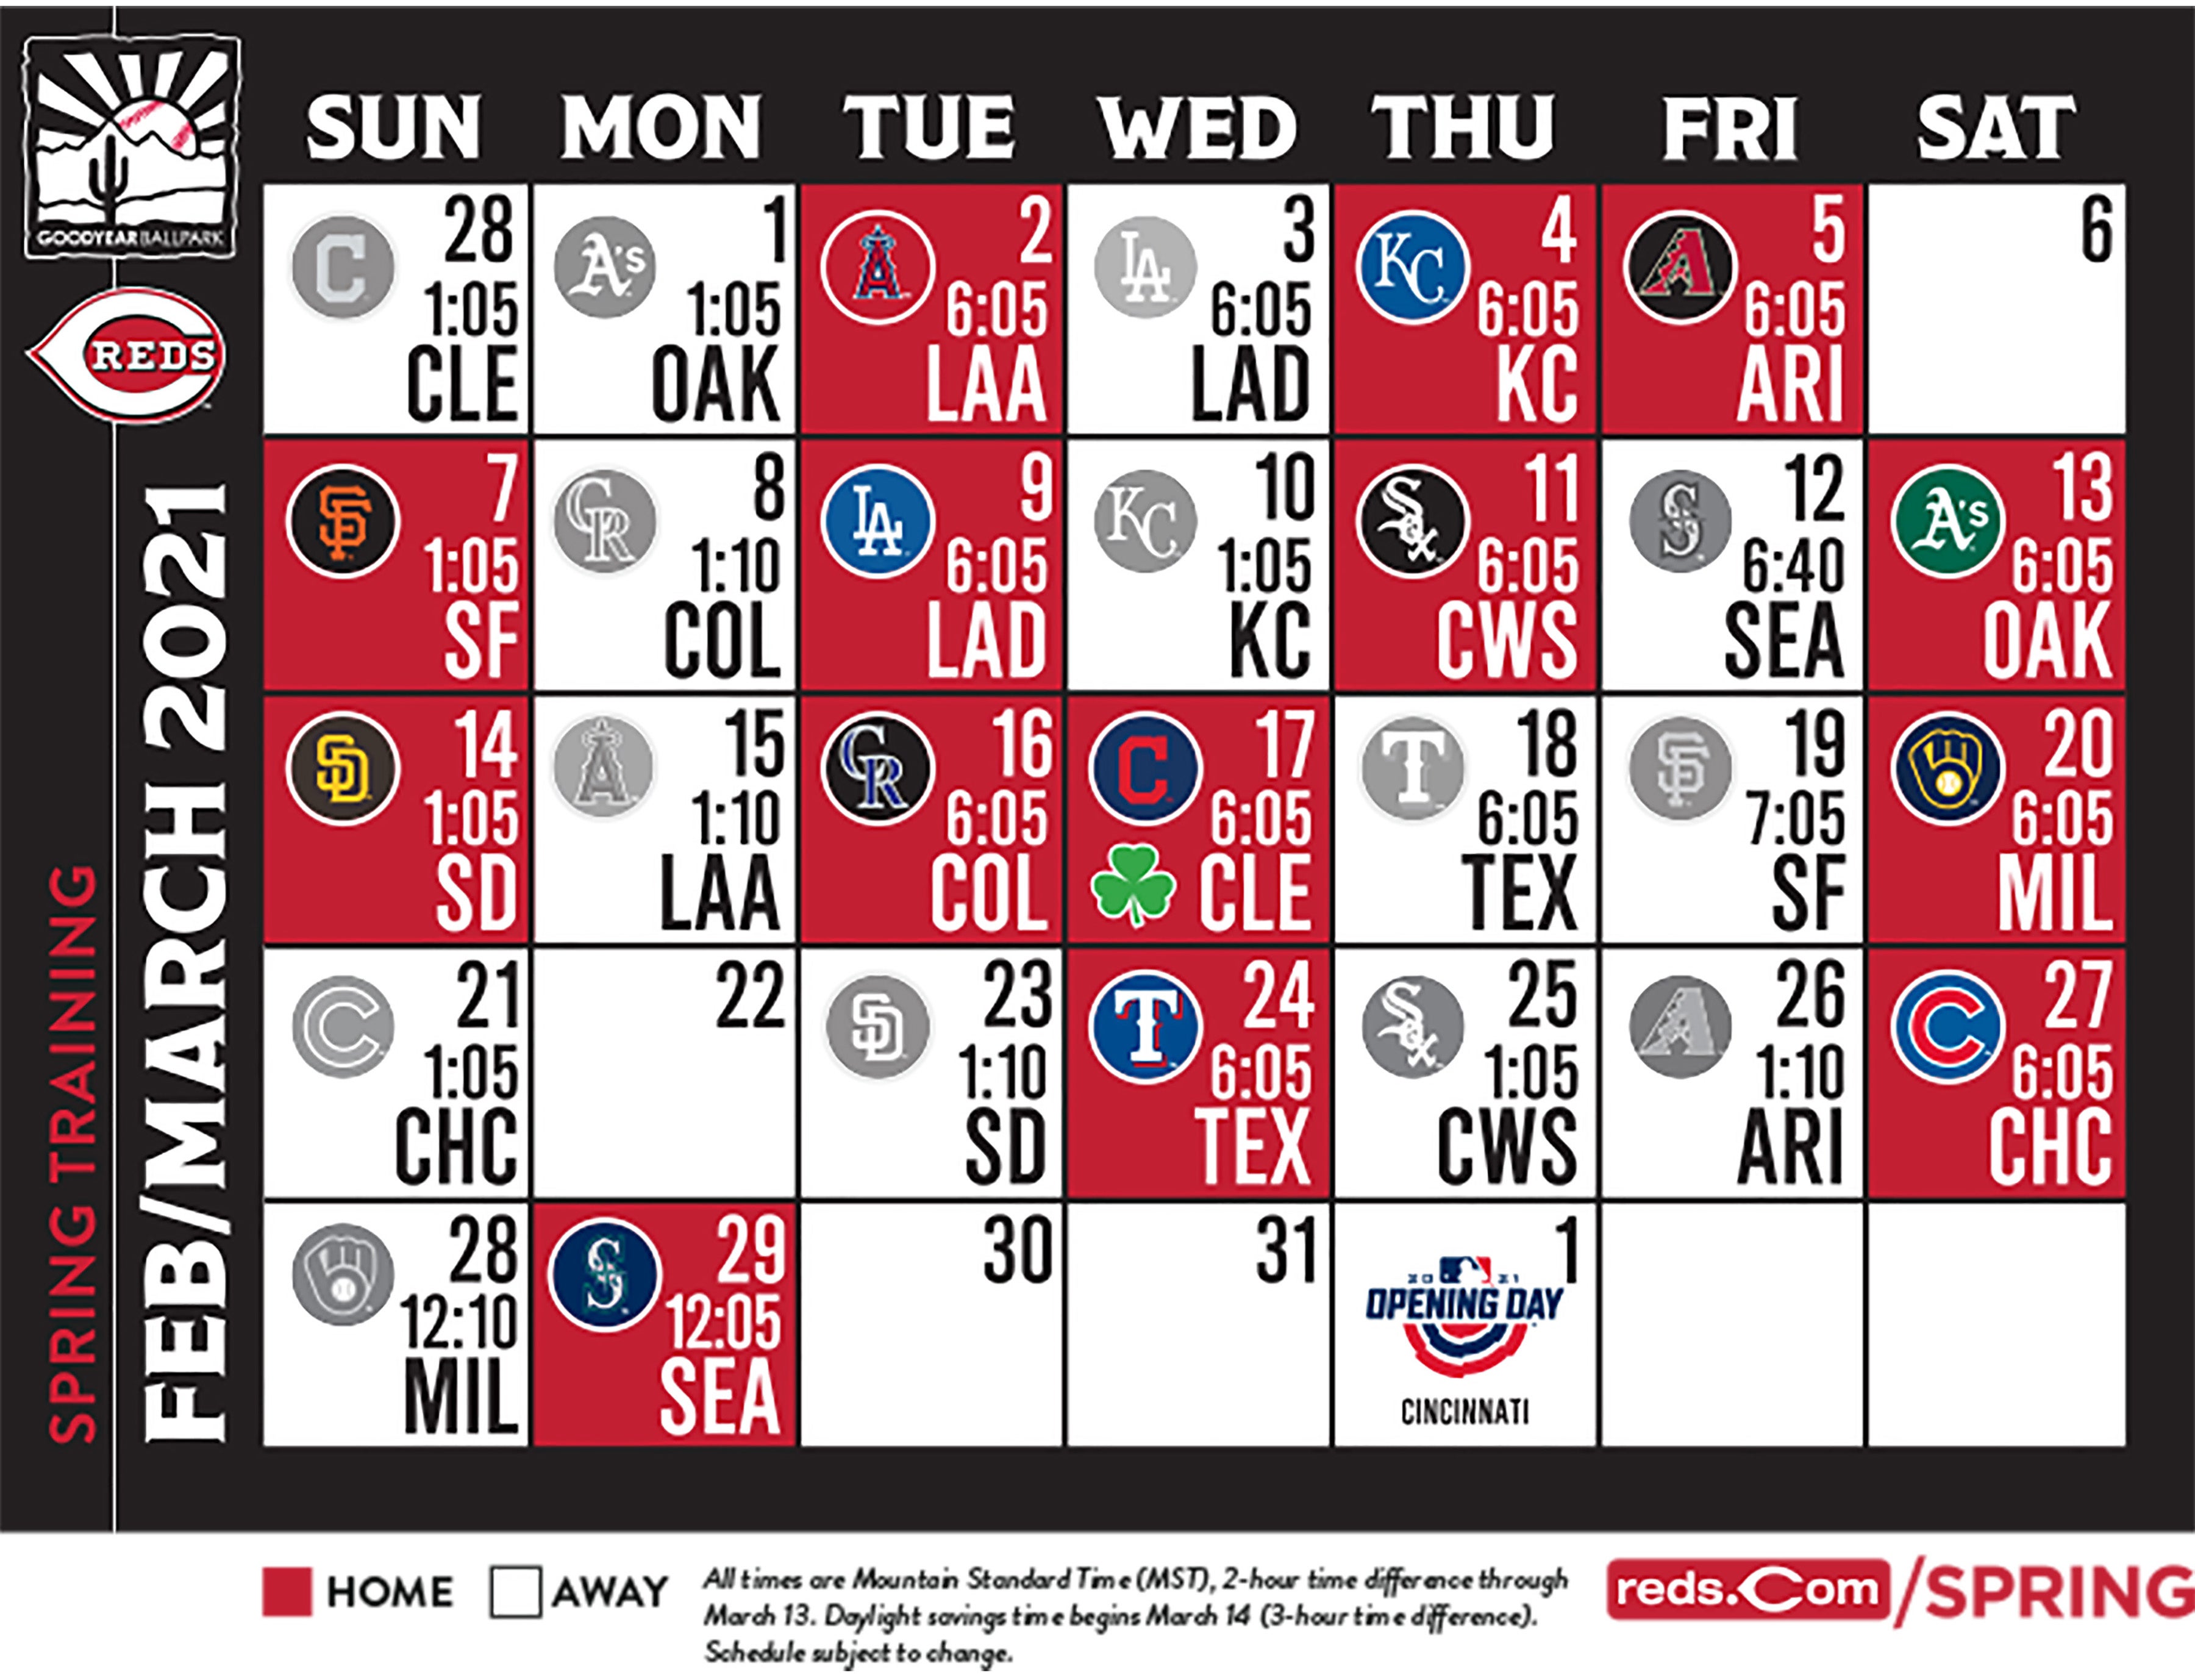 Reds have game day job openings - The Tribune